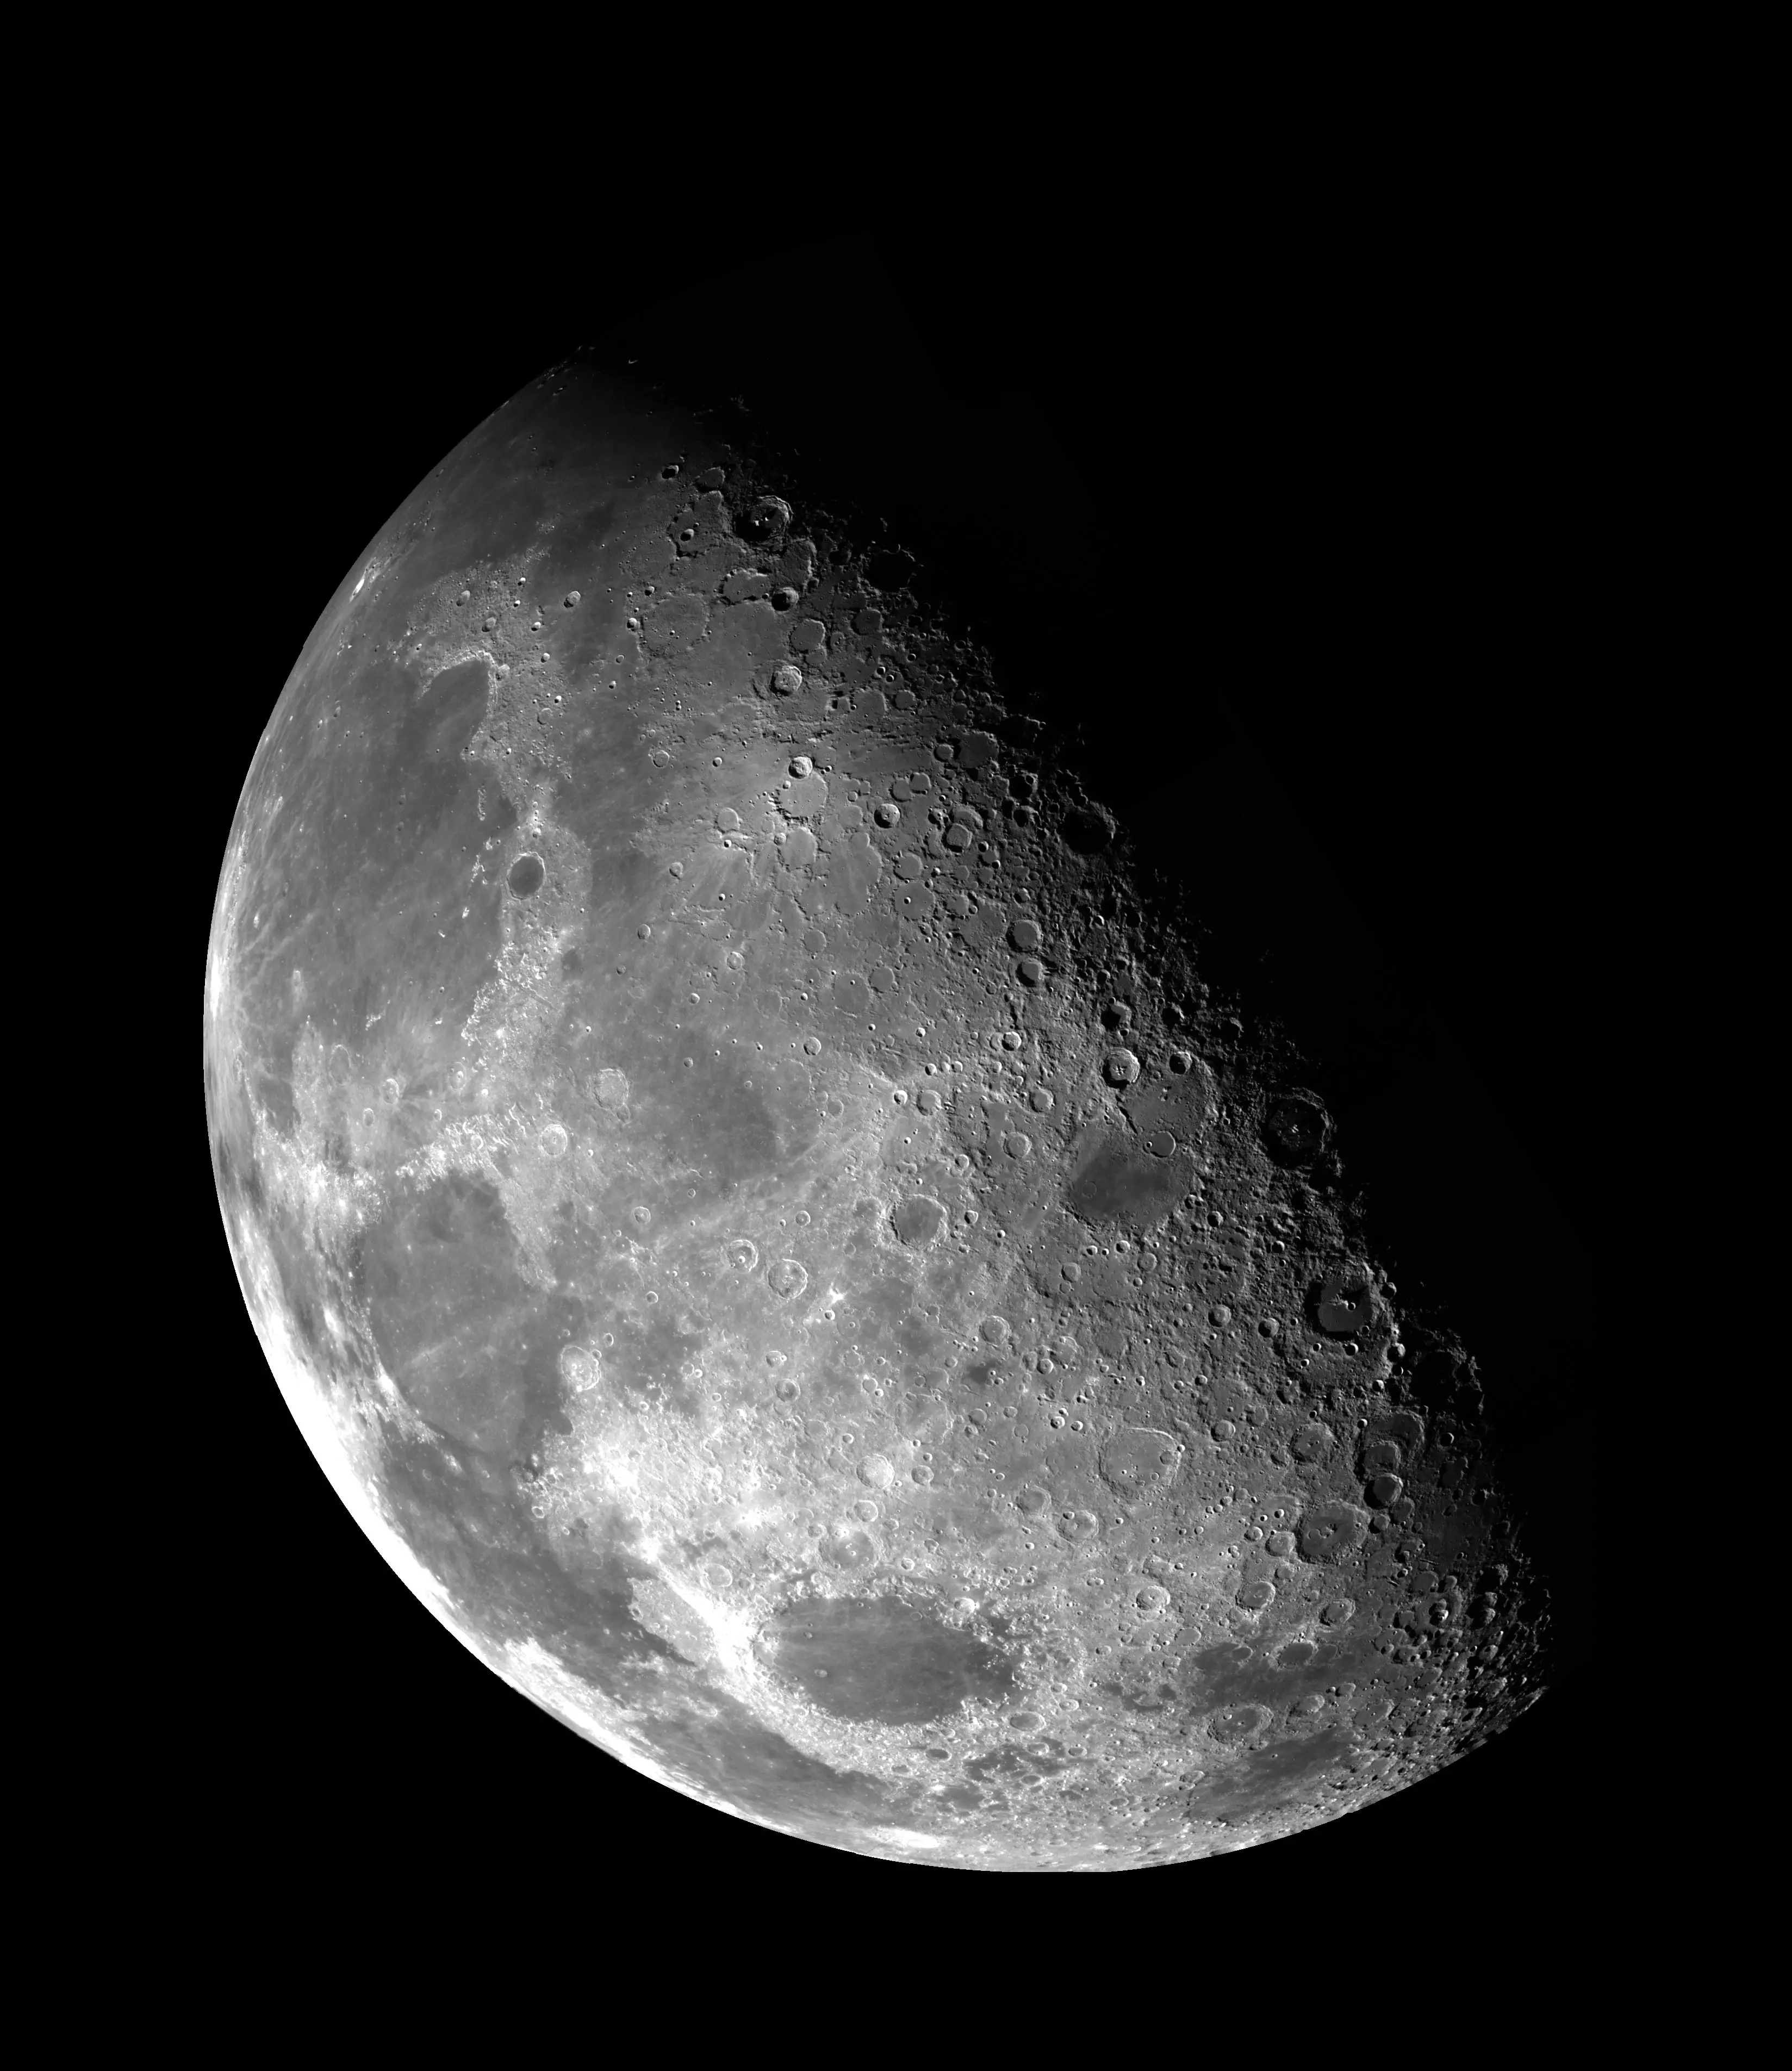 The jigsaw uses the clearest image NASA have ever taken of the moon (